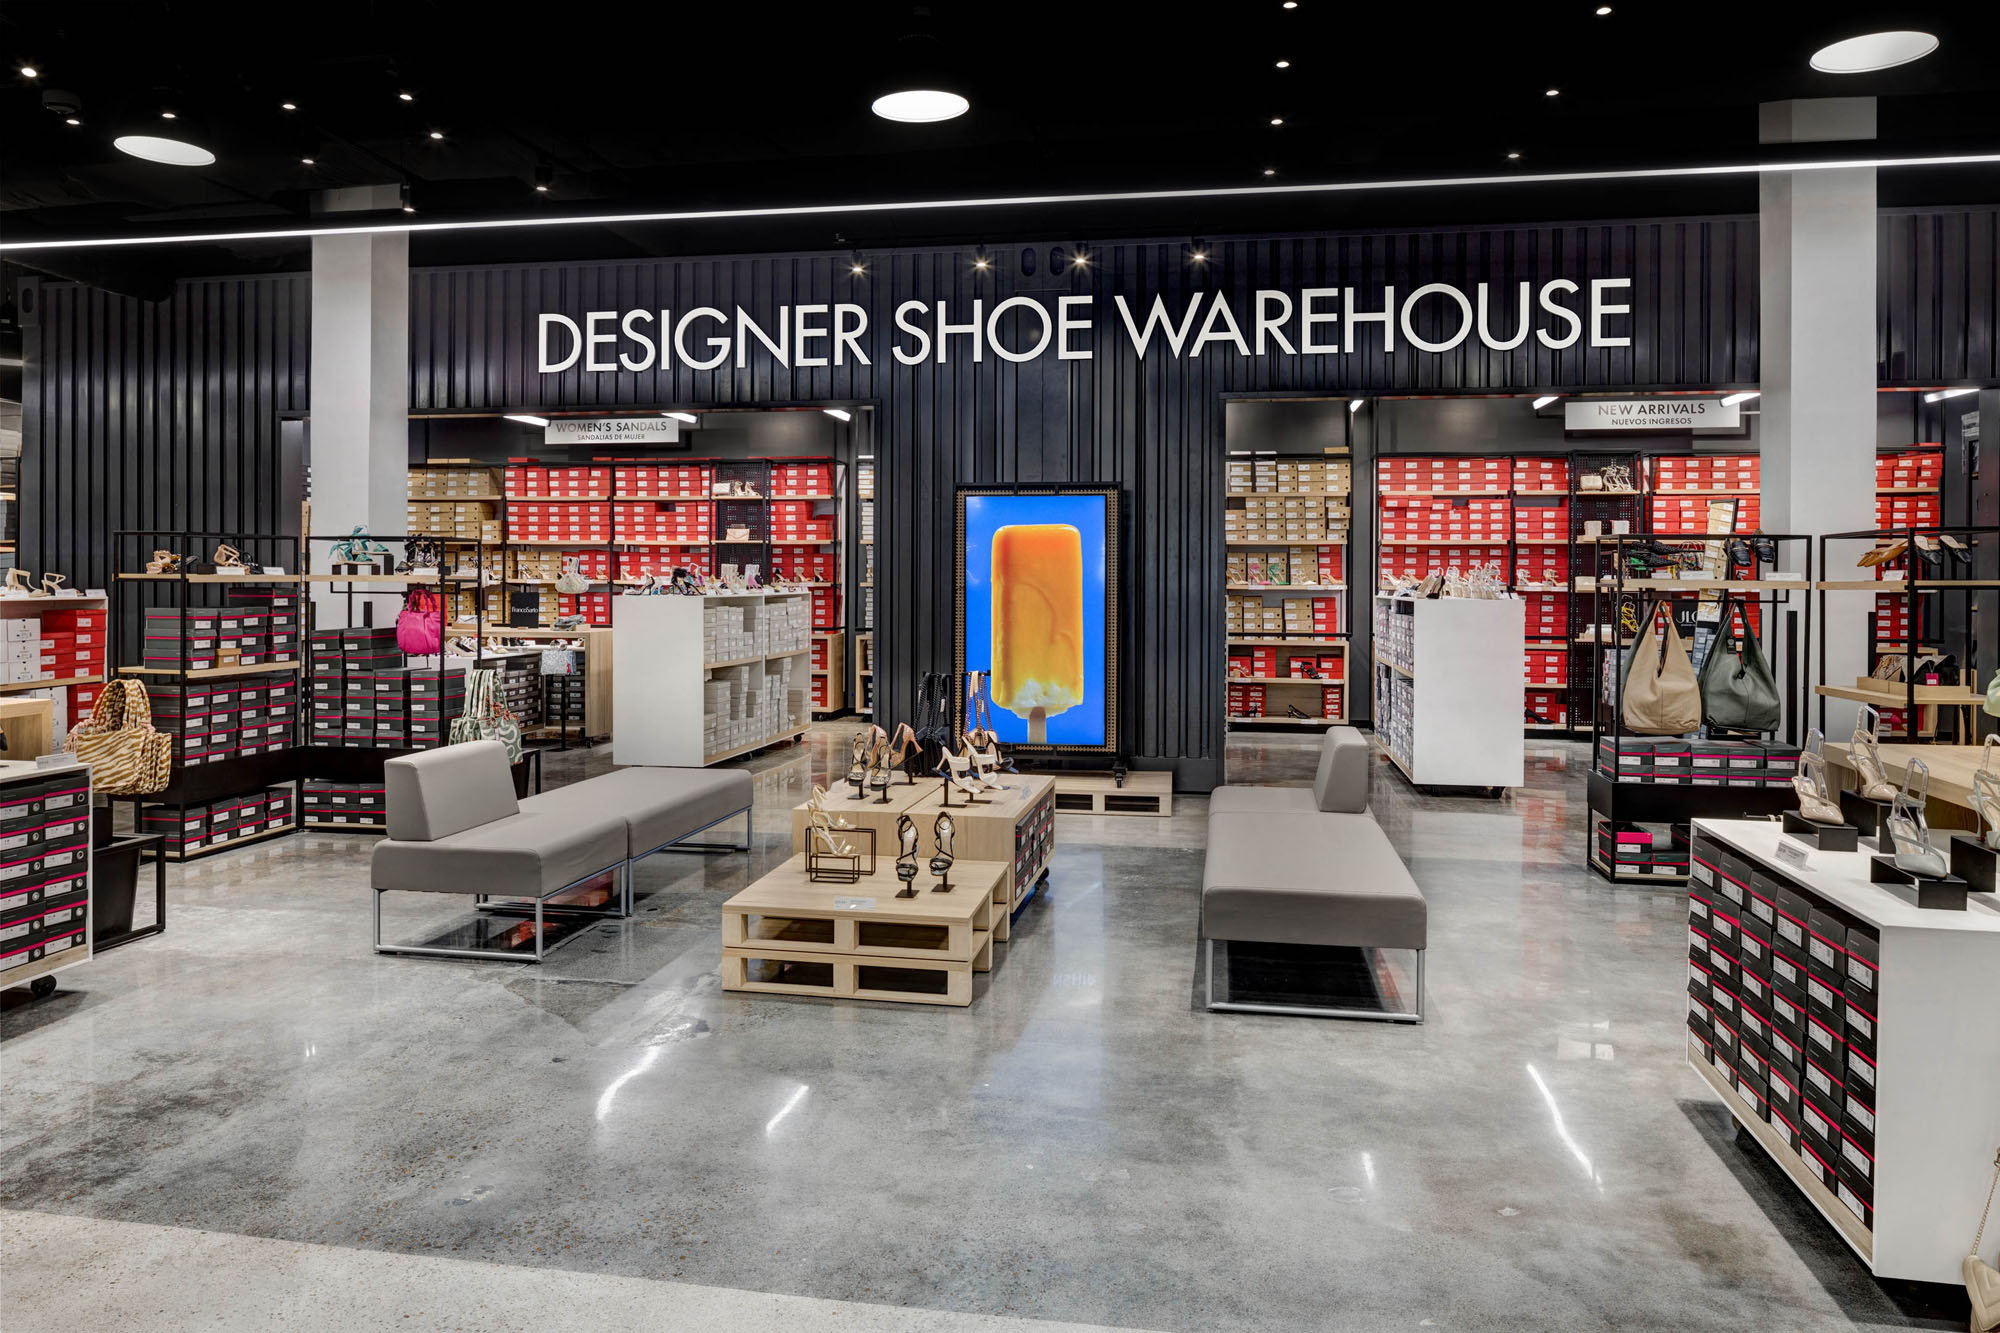 Put Your Shopping Shoes On! DSW Designer Shoe Warehouse is Open